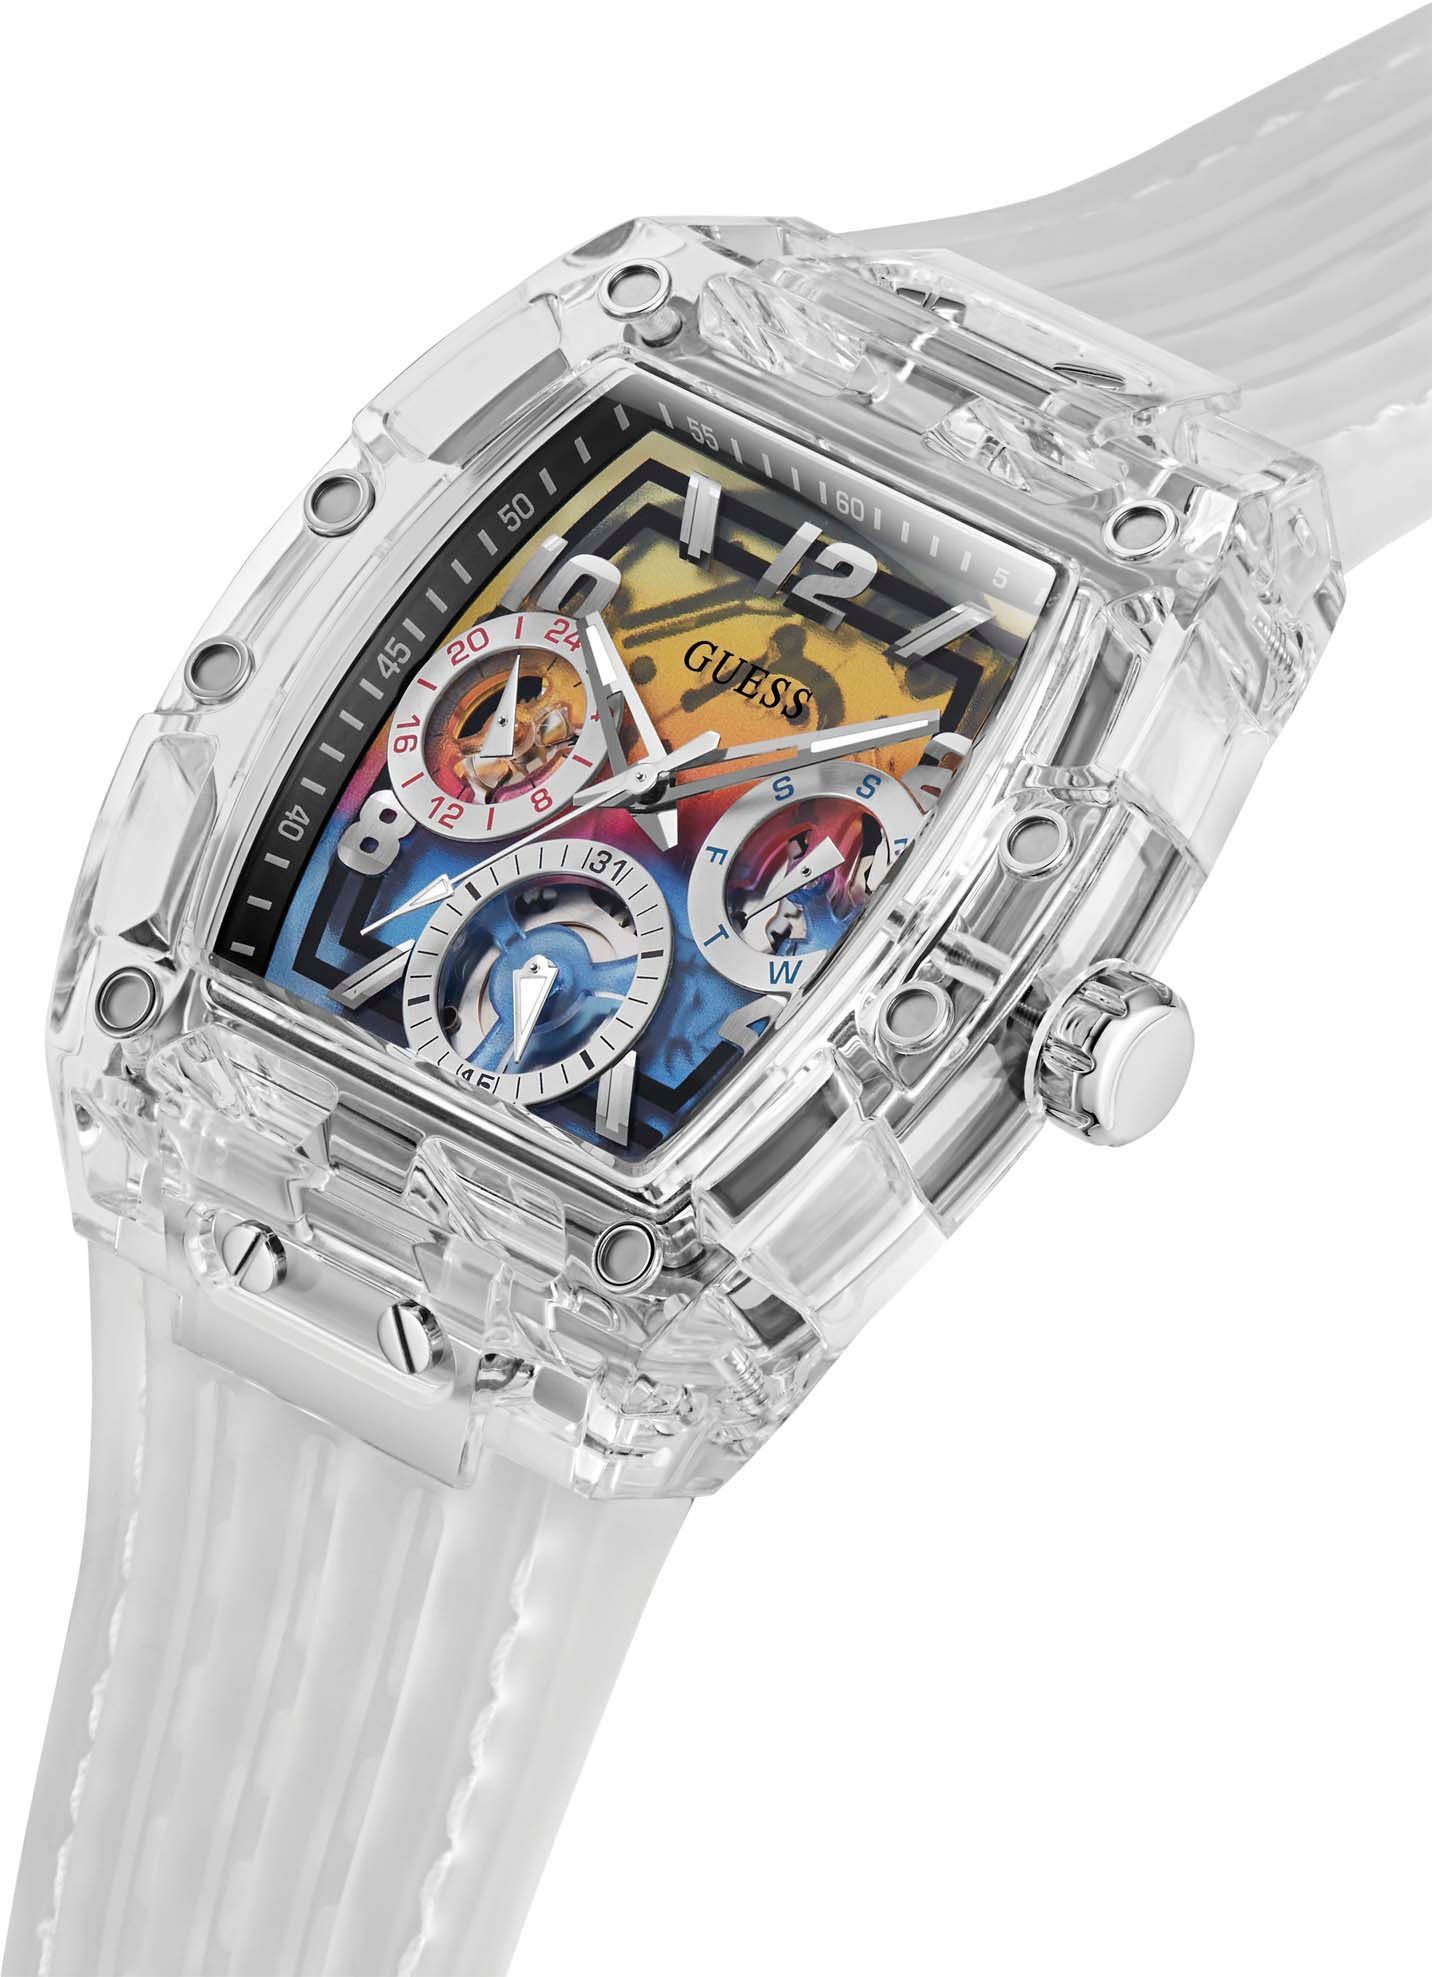 Guess Multifunktionsuhr GW0499G3